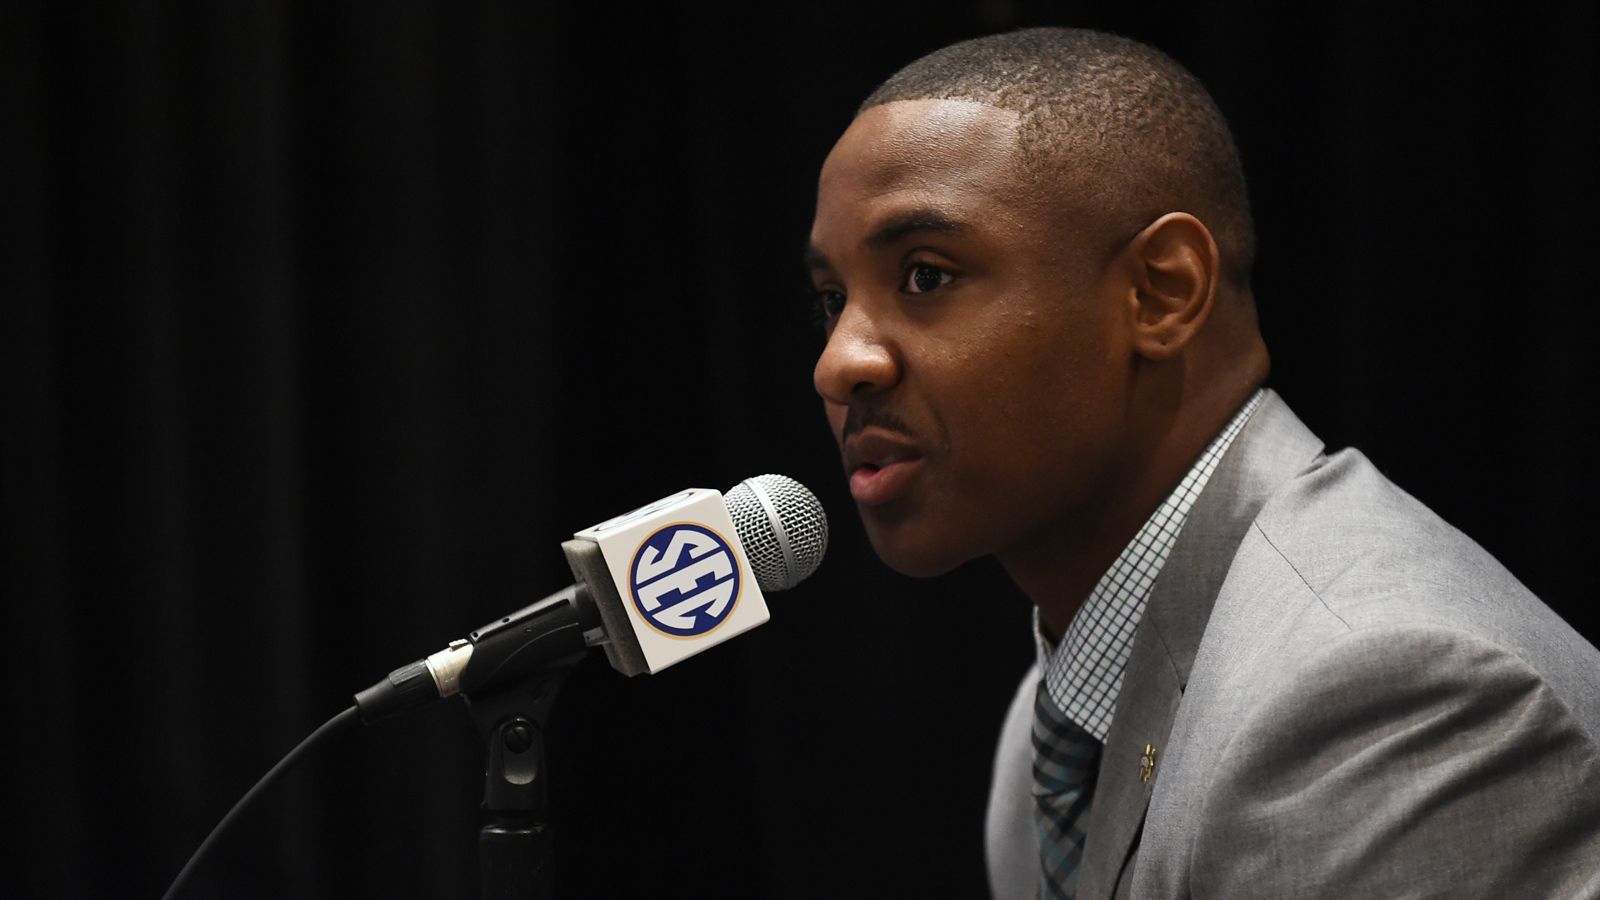 MSU's Jay Hughes shares stories from NCAA convention